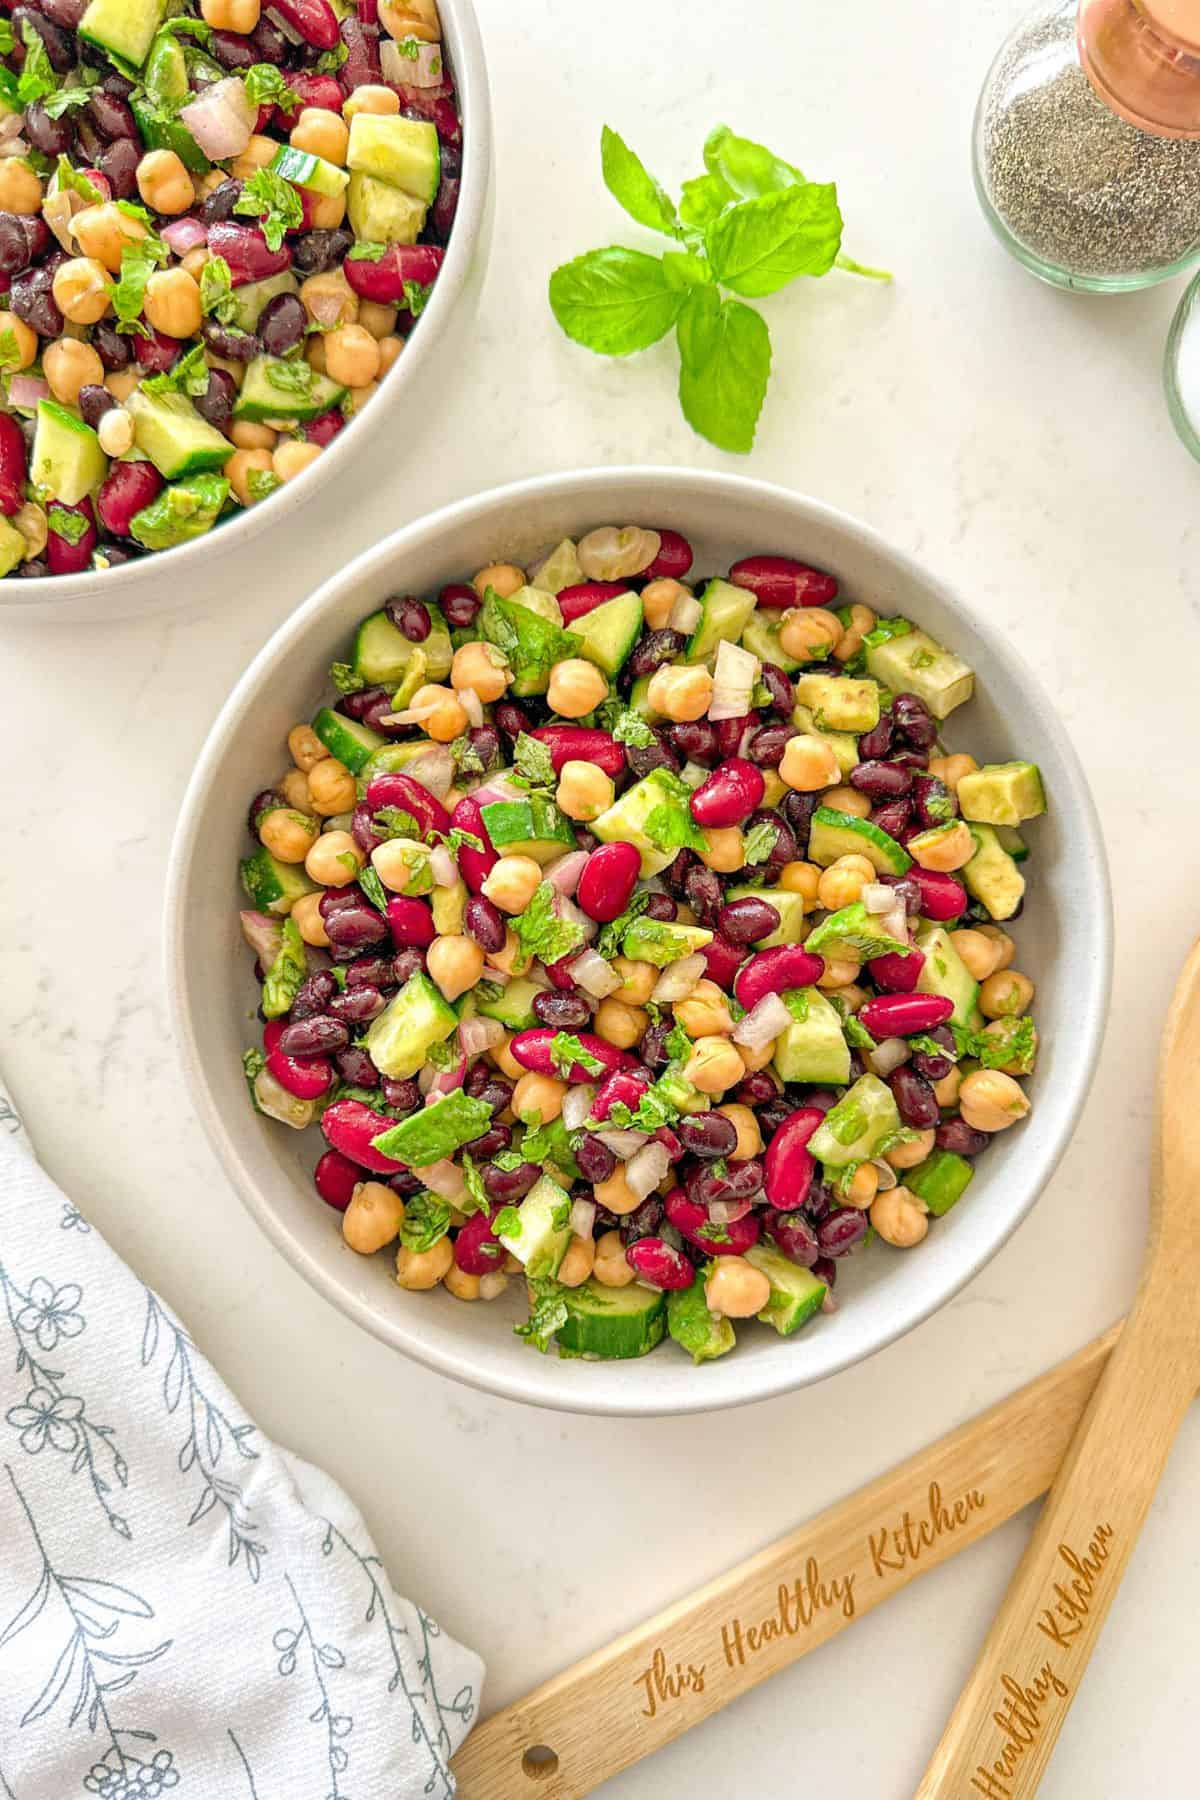 Two bowls of bean salad with cucumber, avocado, red onion, and basil.